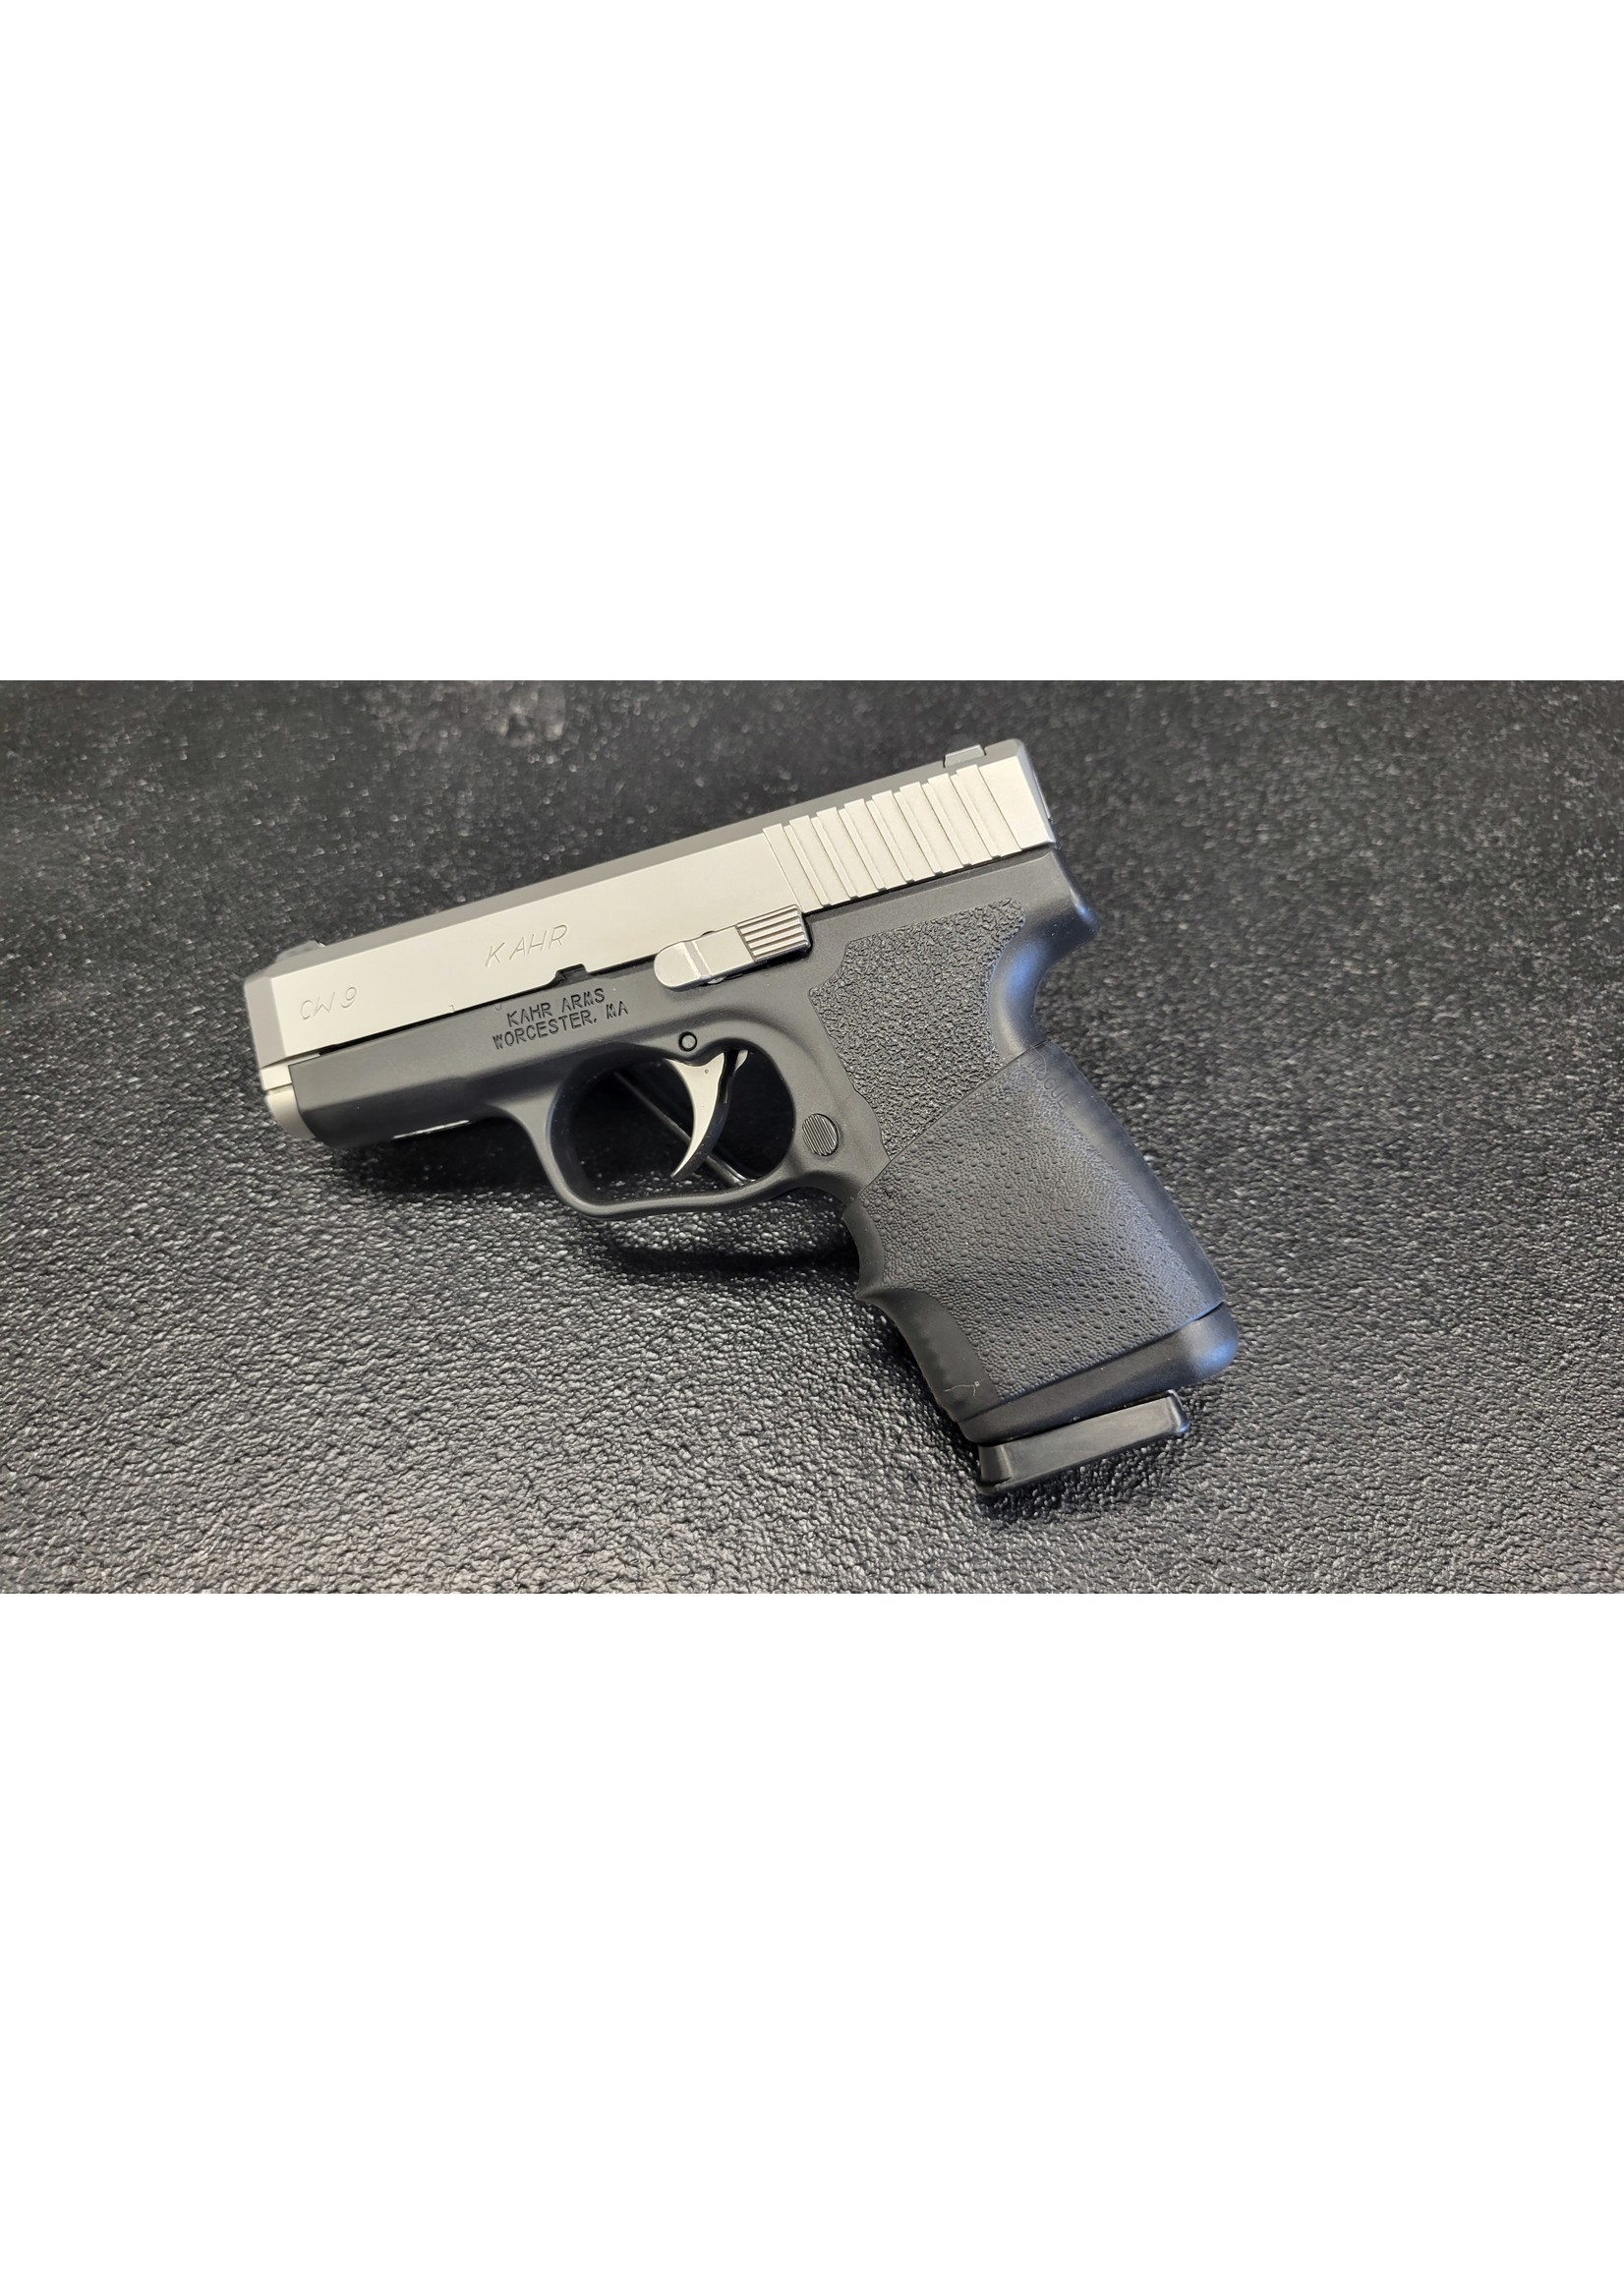 Kahr (USED) Kahr CW9 (9mm Pistol KACW9093N CW9 9MM SS/POLY 3.5" 7+1 NS ONE MAG | FRONT NIGHT SIGHT 9mm